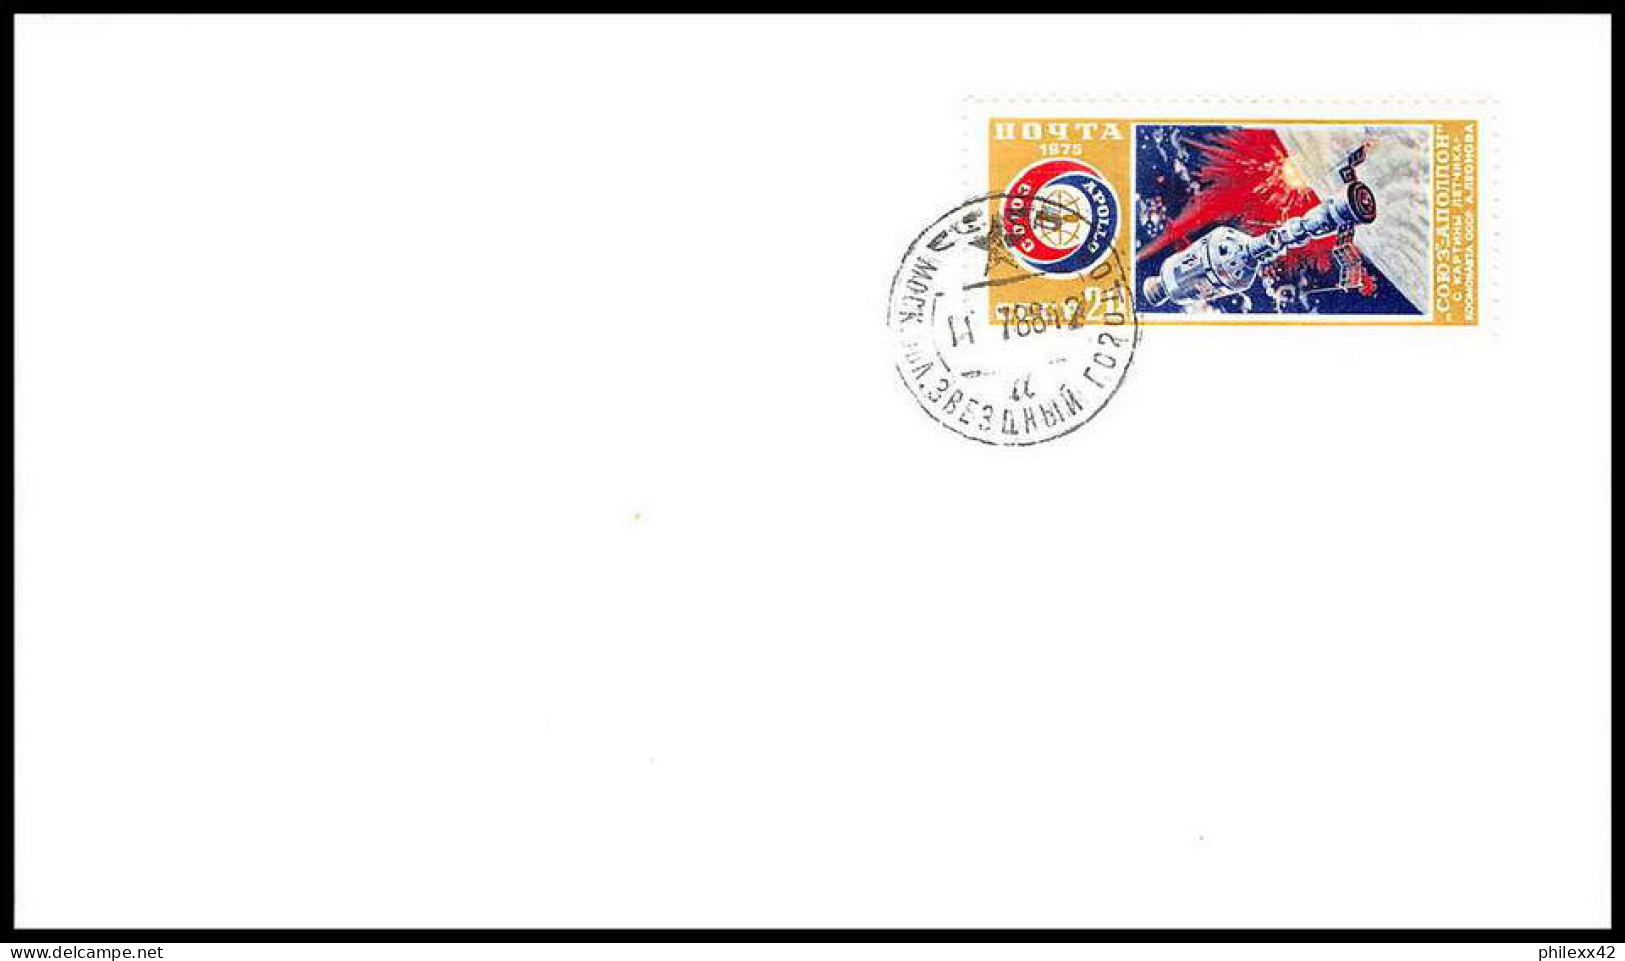 discount 75 cent piece  collection lot 3 - 69 Lettres covers espace spac) différentes usa japan russia france fdc